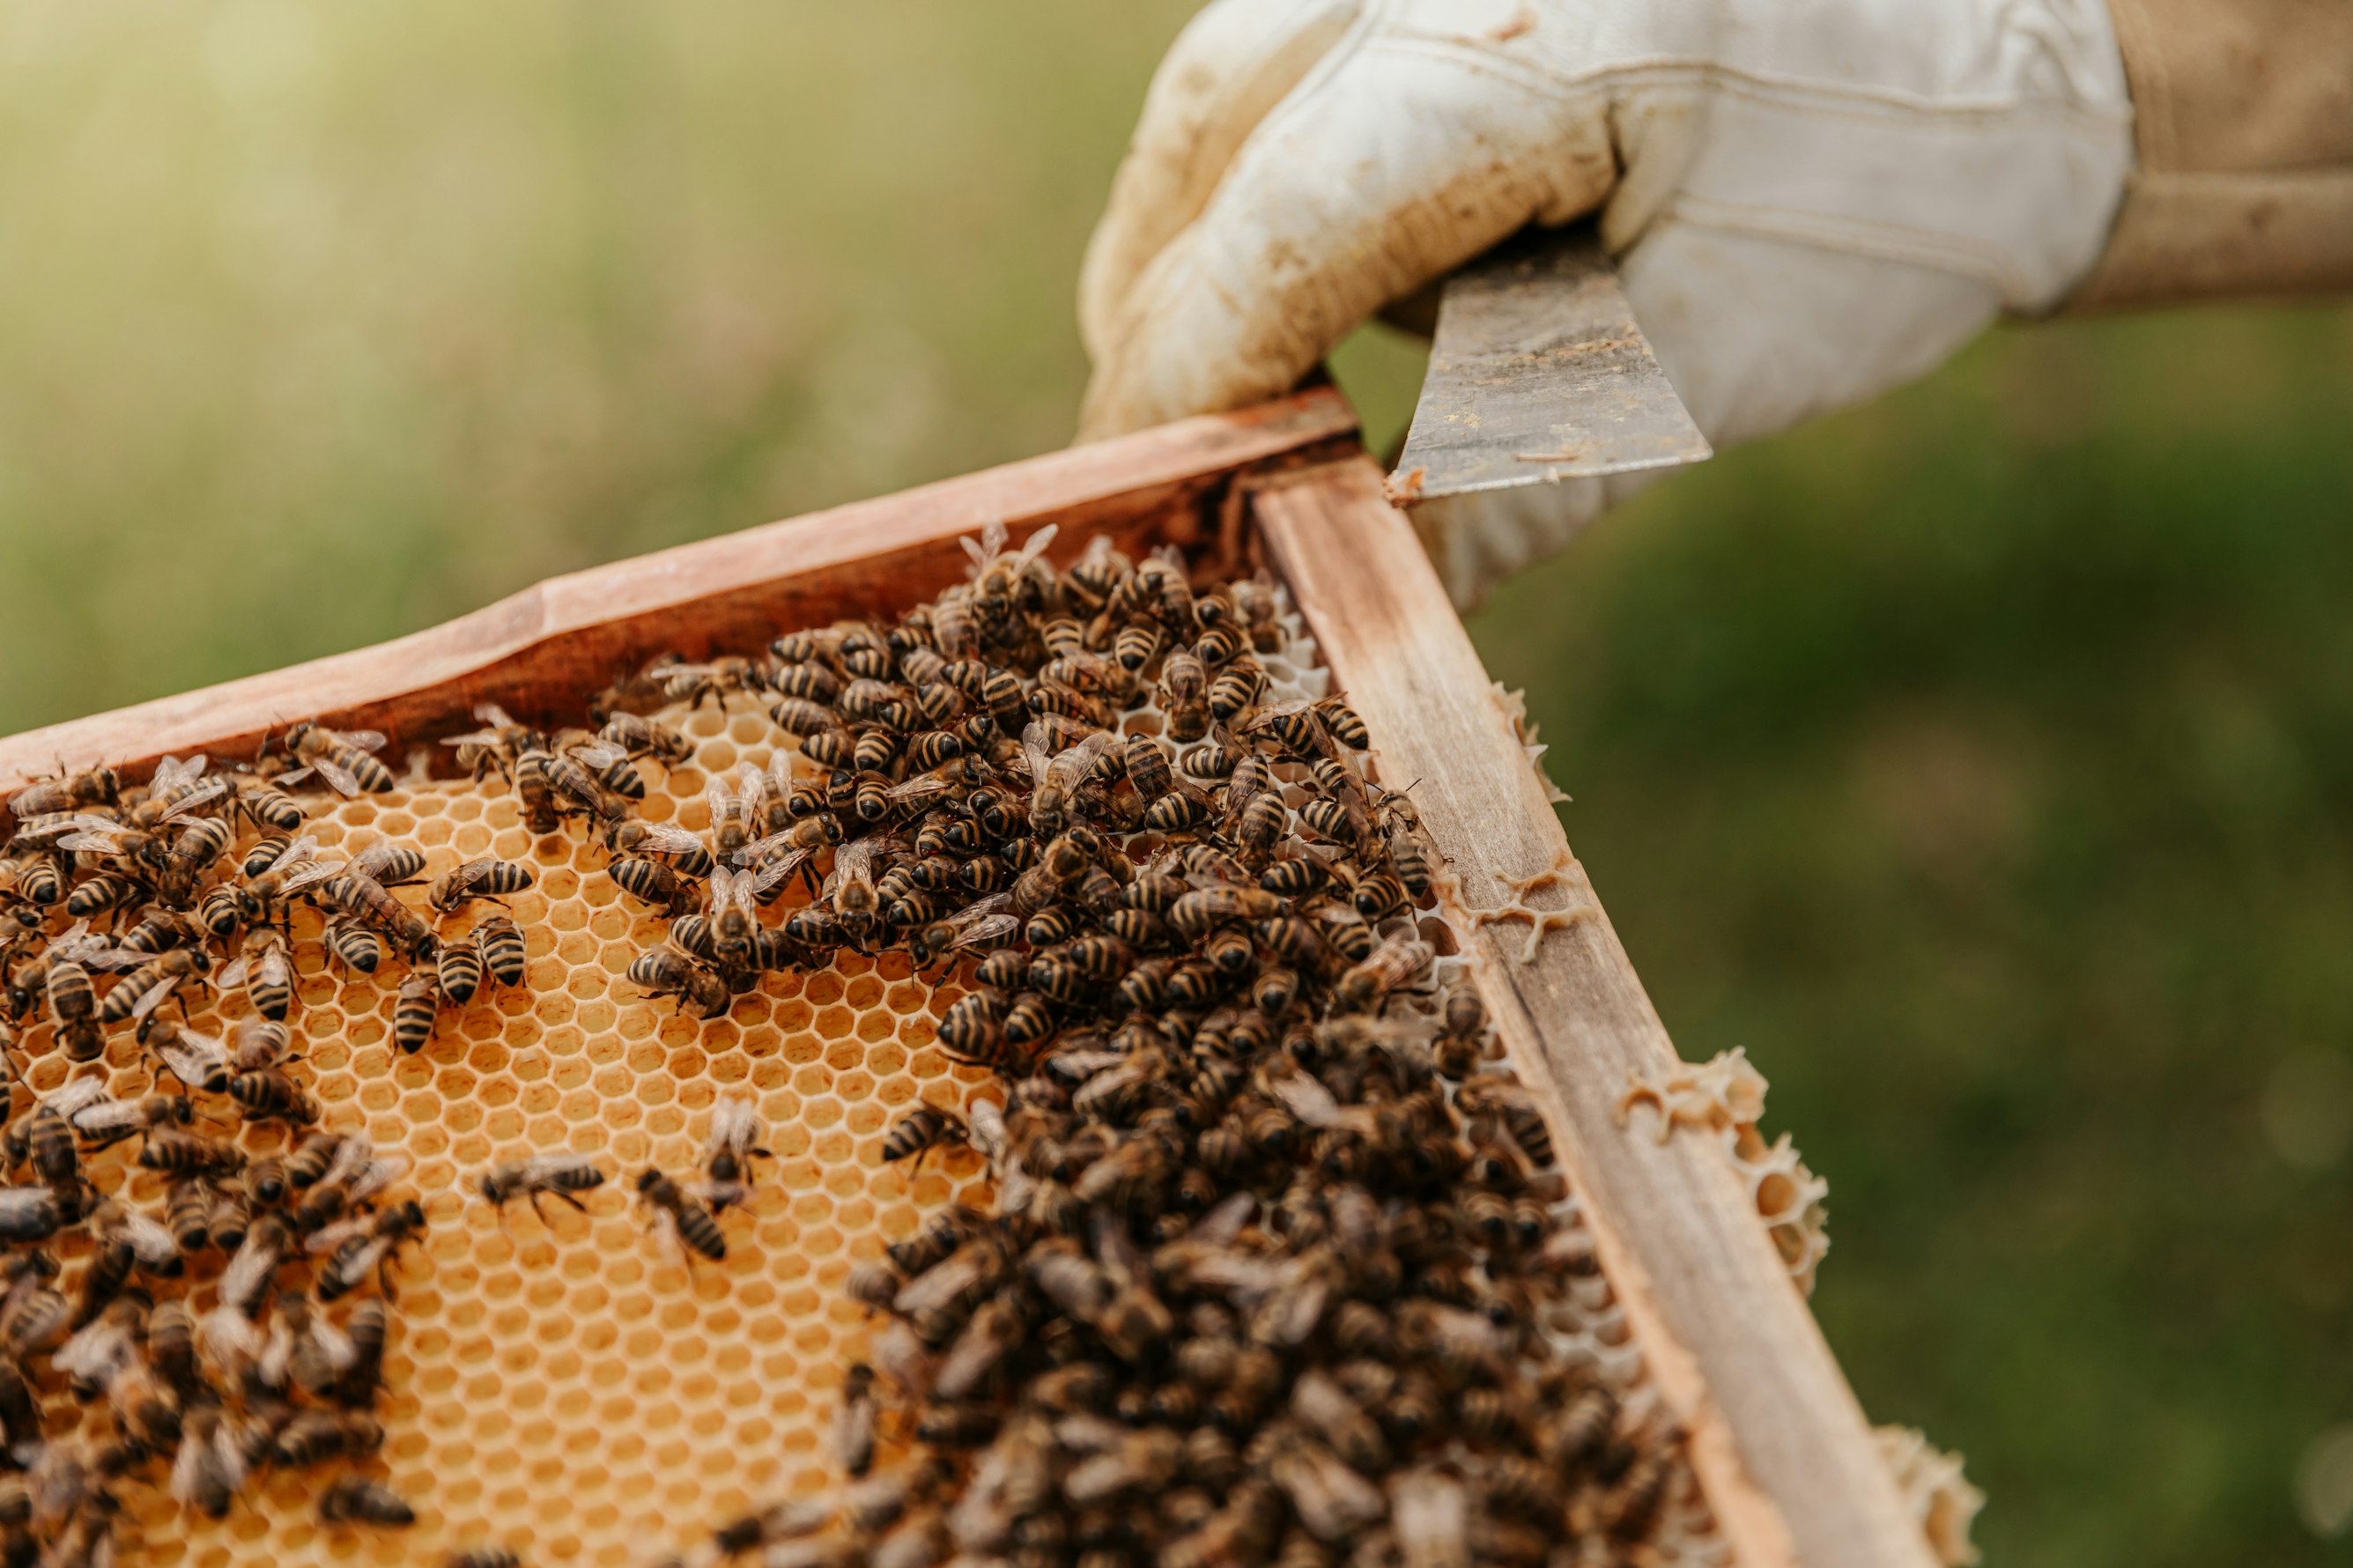 EPA Says Pesticide Harms Bees